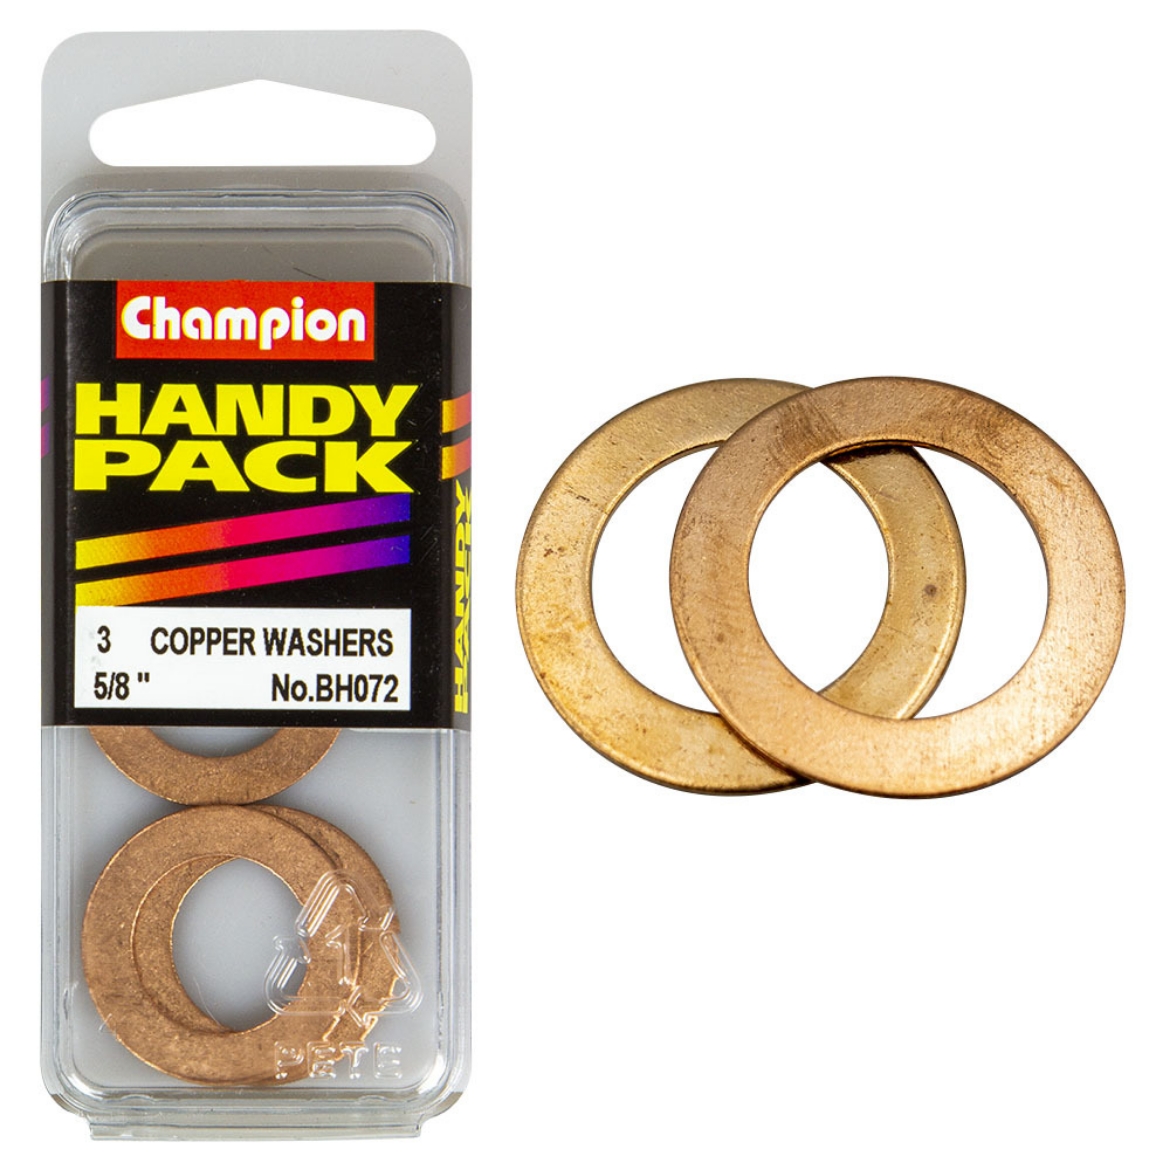 Picture of Handy Pk Copper Washers 20g 5/8x1 CWC (Pkt.3)